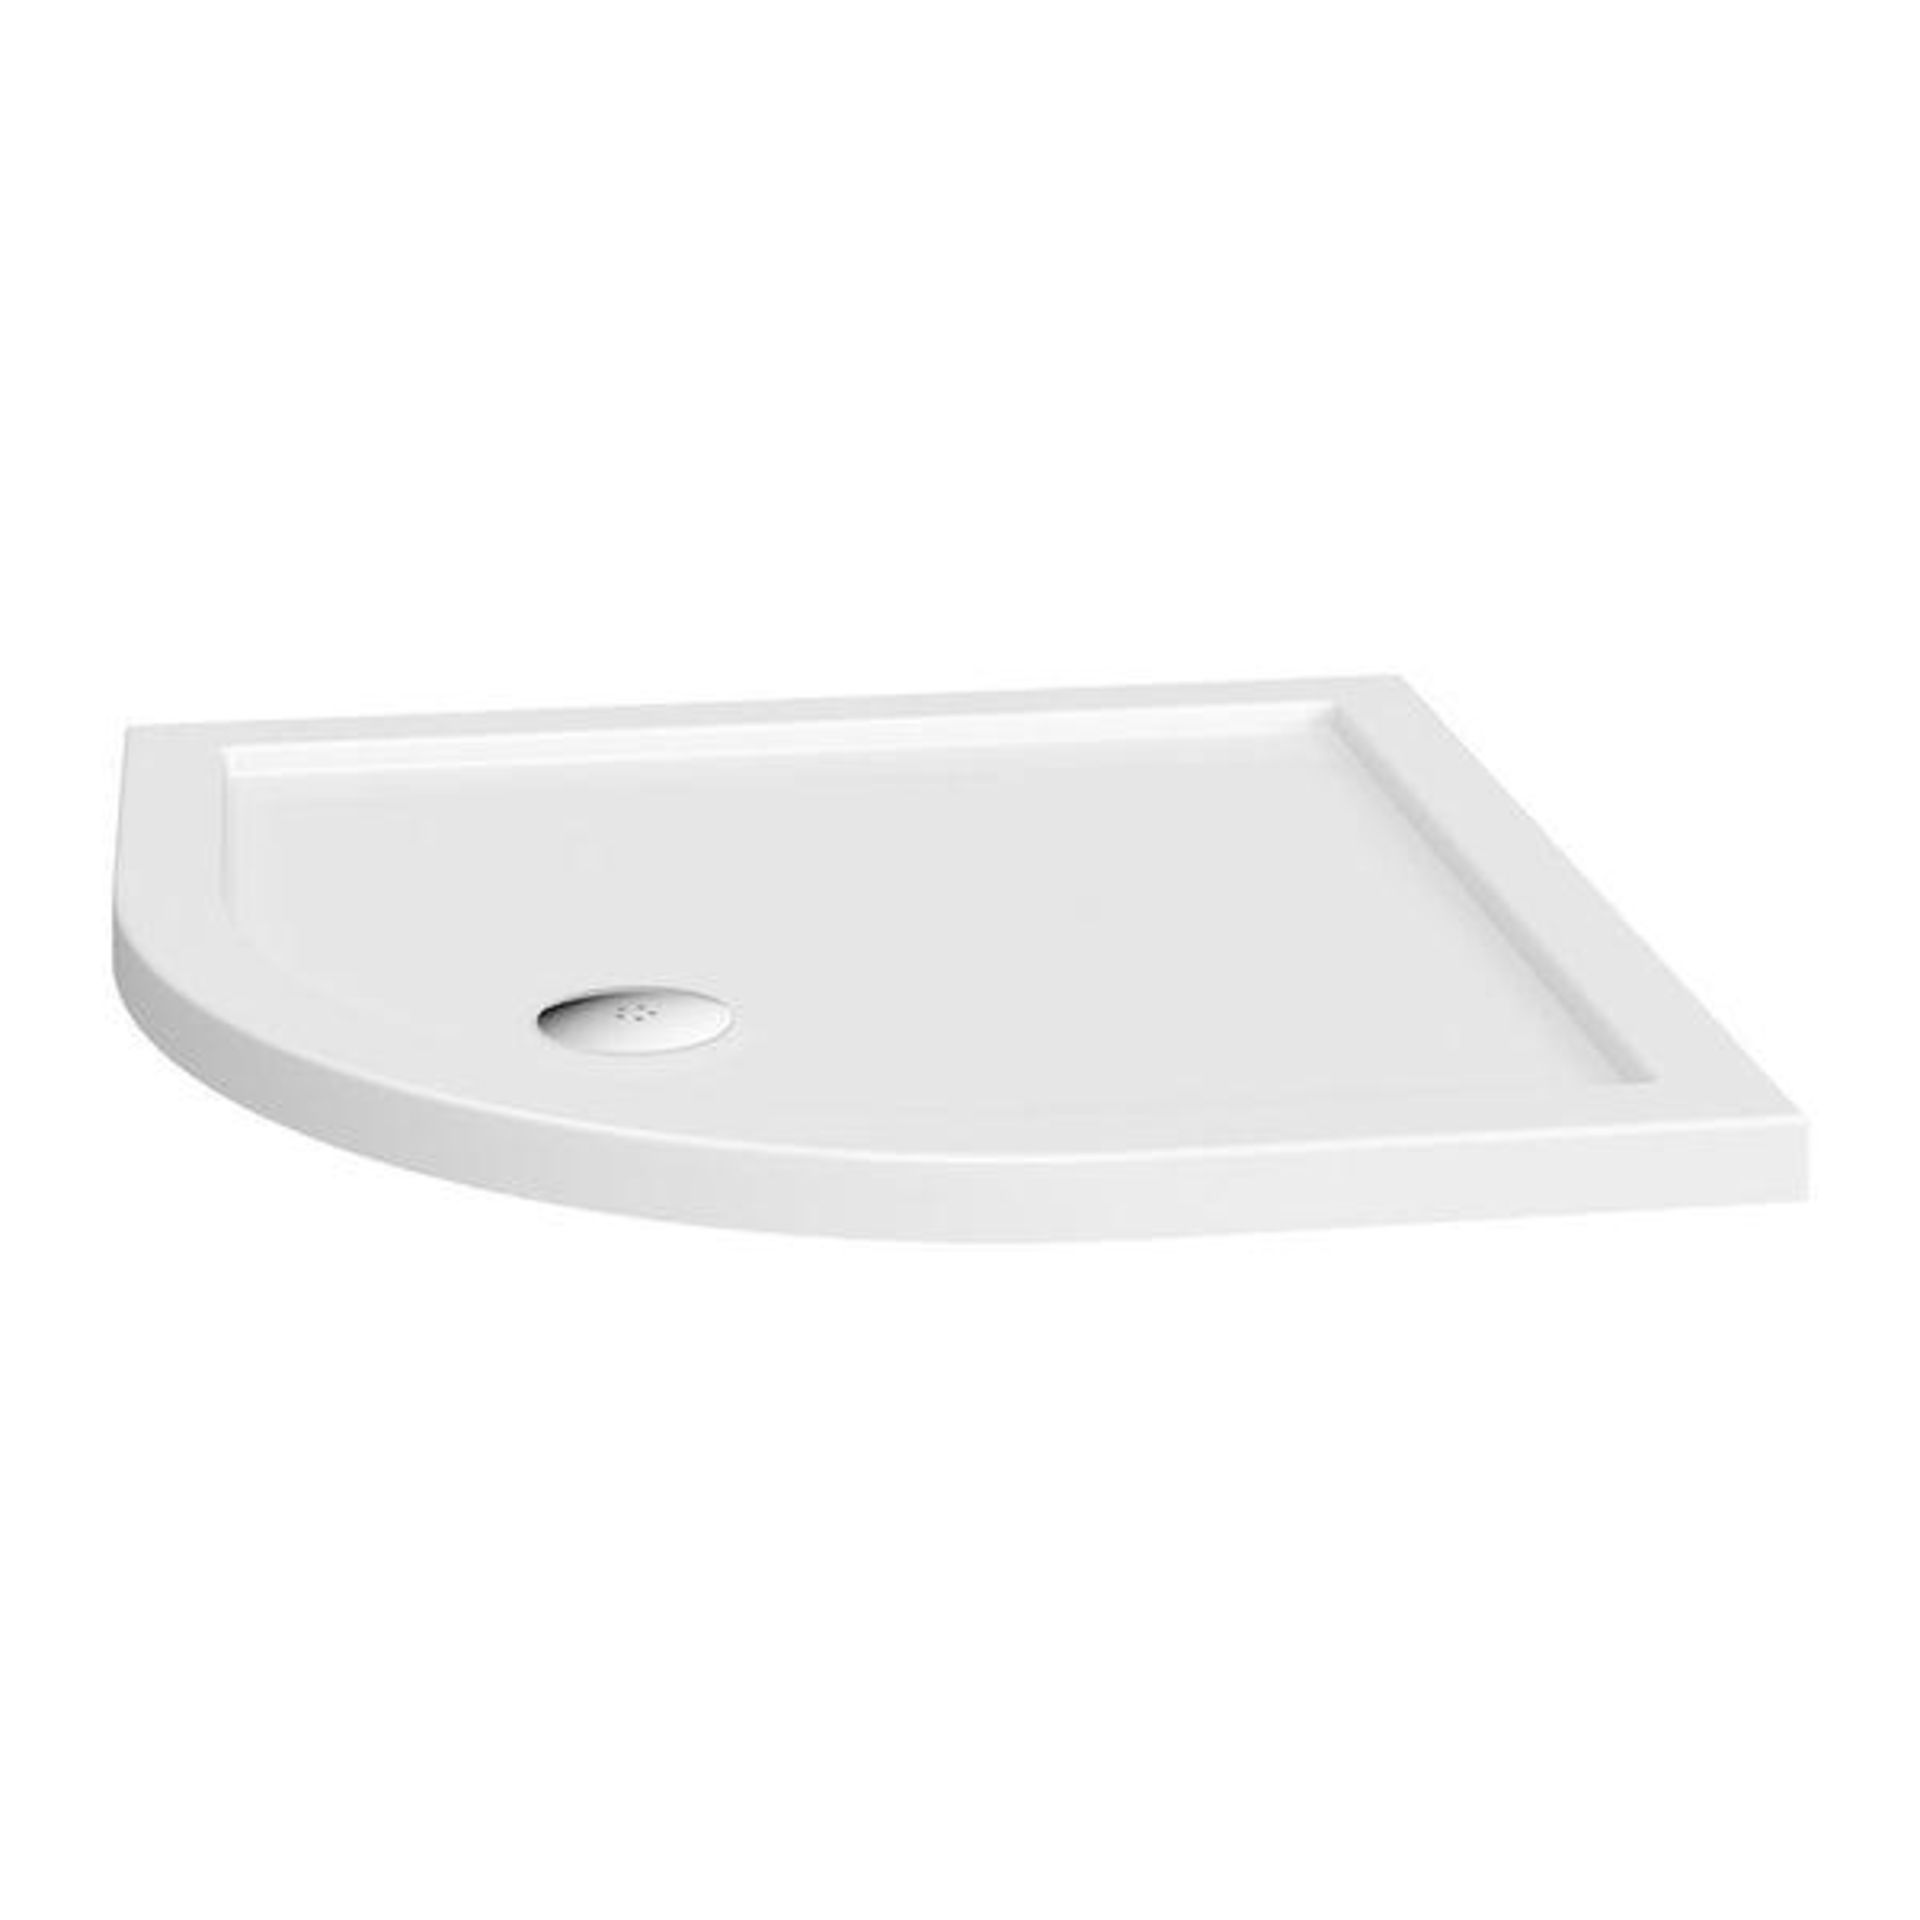 1 x Orchard Quad Slimline Stone Shower Tray - New / Unused Stock - Dimensions: 800 x 800 x 40mm - CL - Image 3 of 3